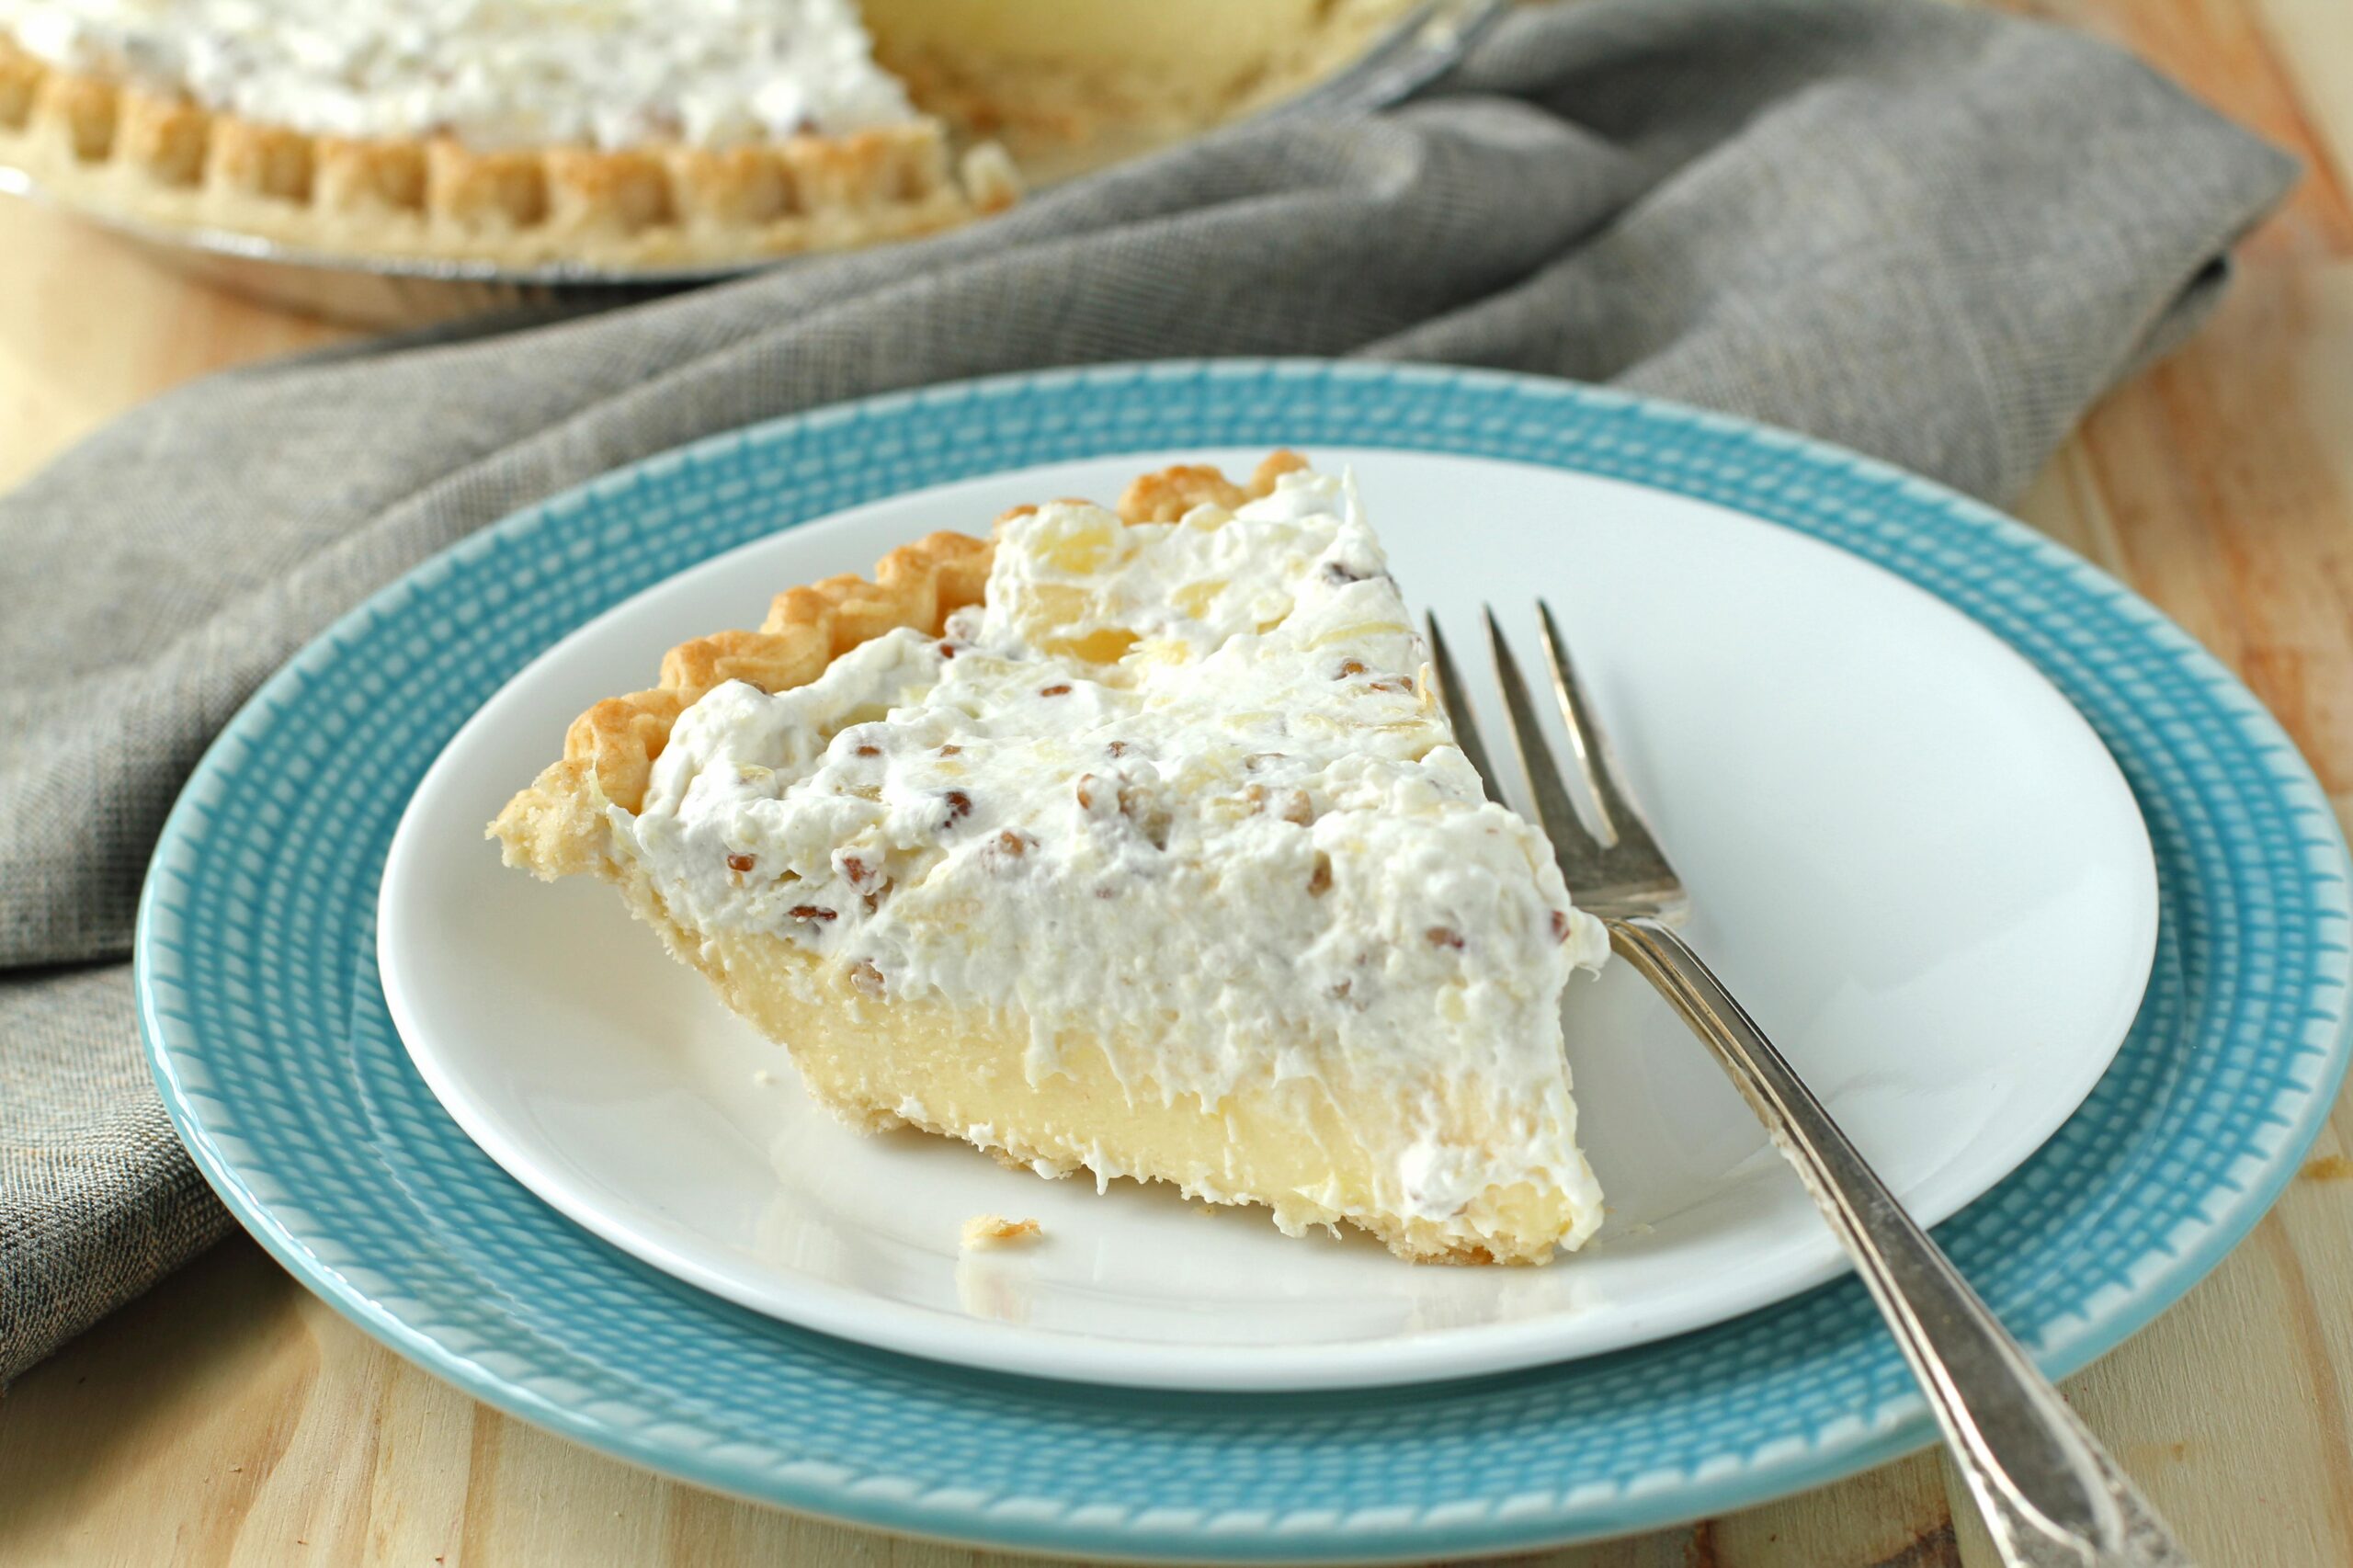  Dive into a luscious slice of this pineapple-infused pie.